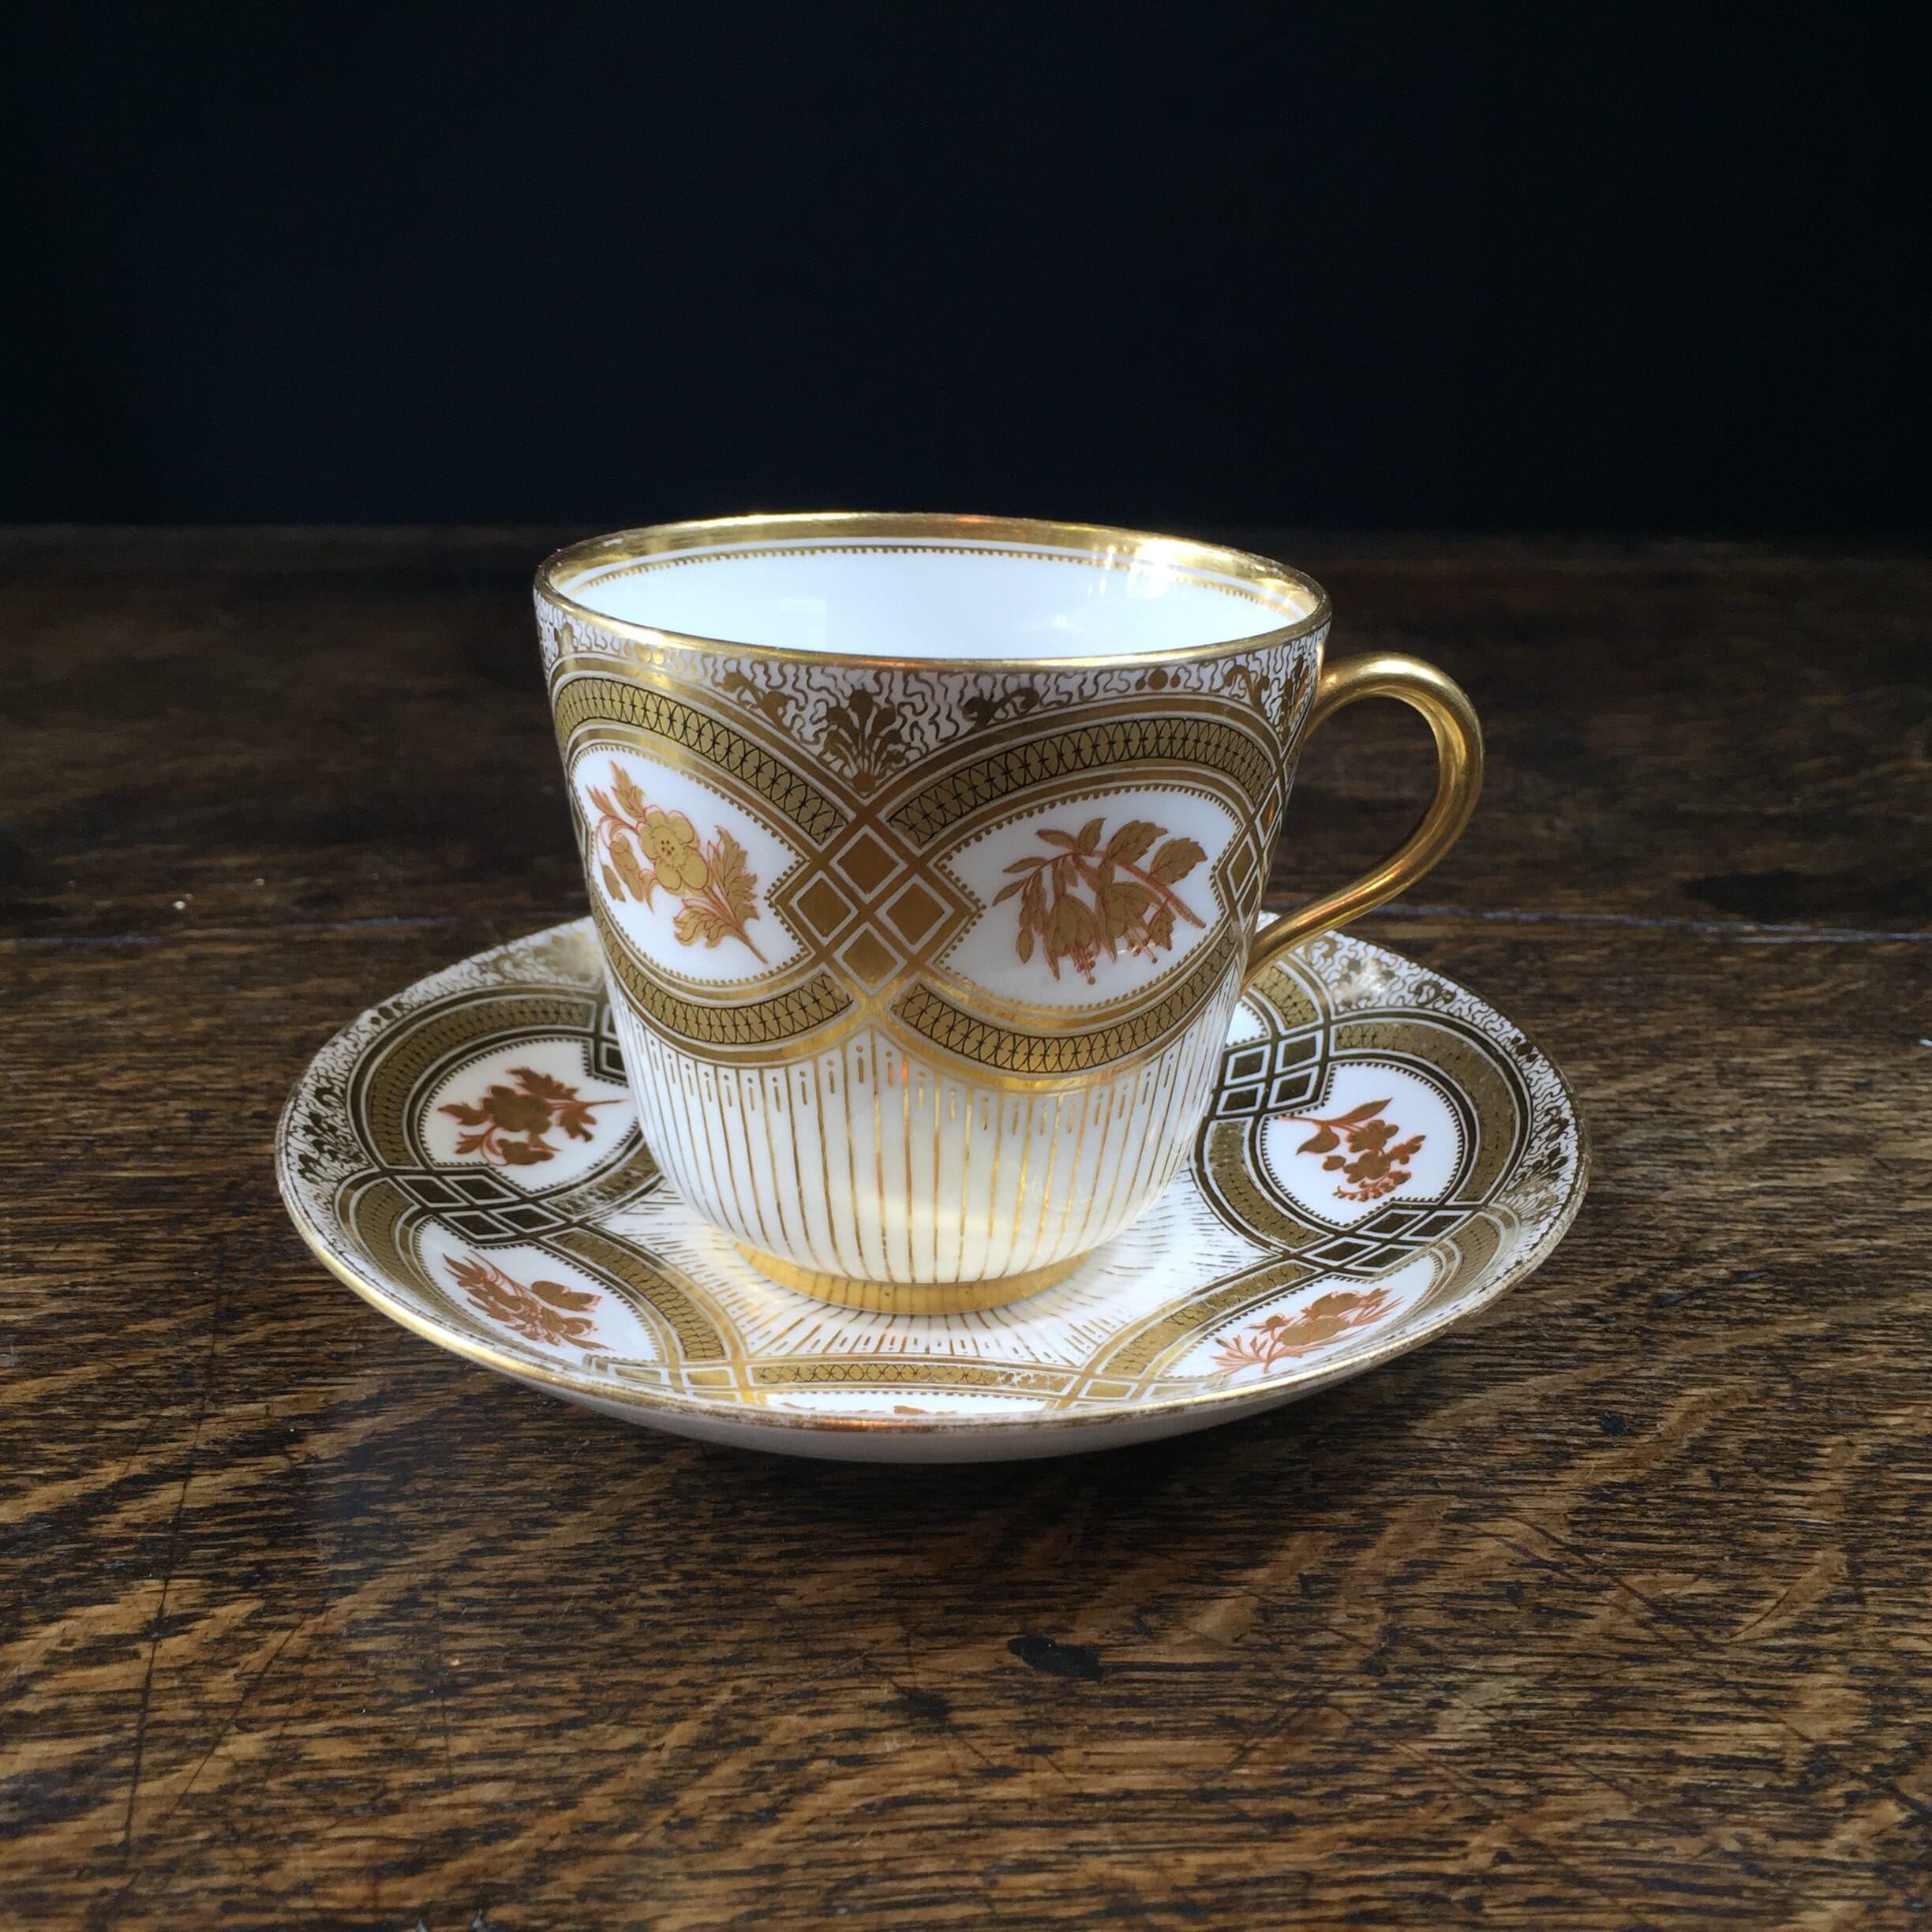 Brown-Westhead, Moore & Co cup & saucer,richly gilt, c.1865 -0